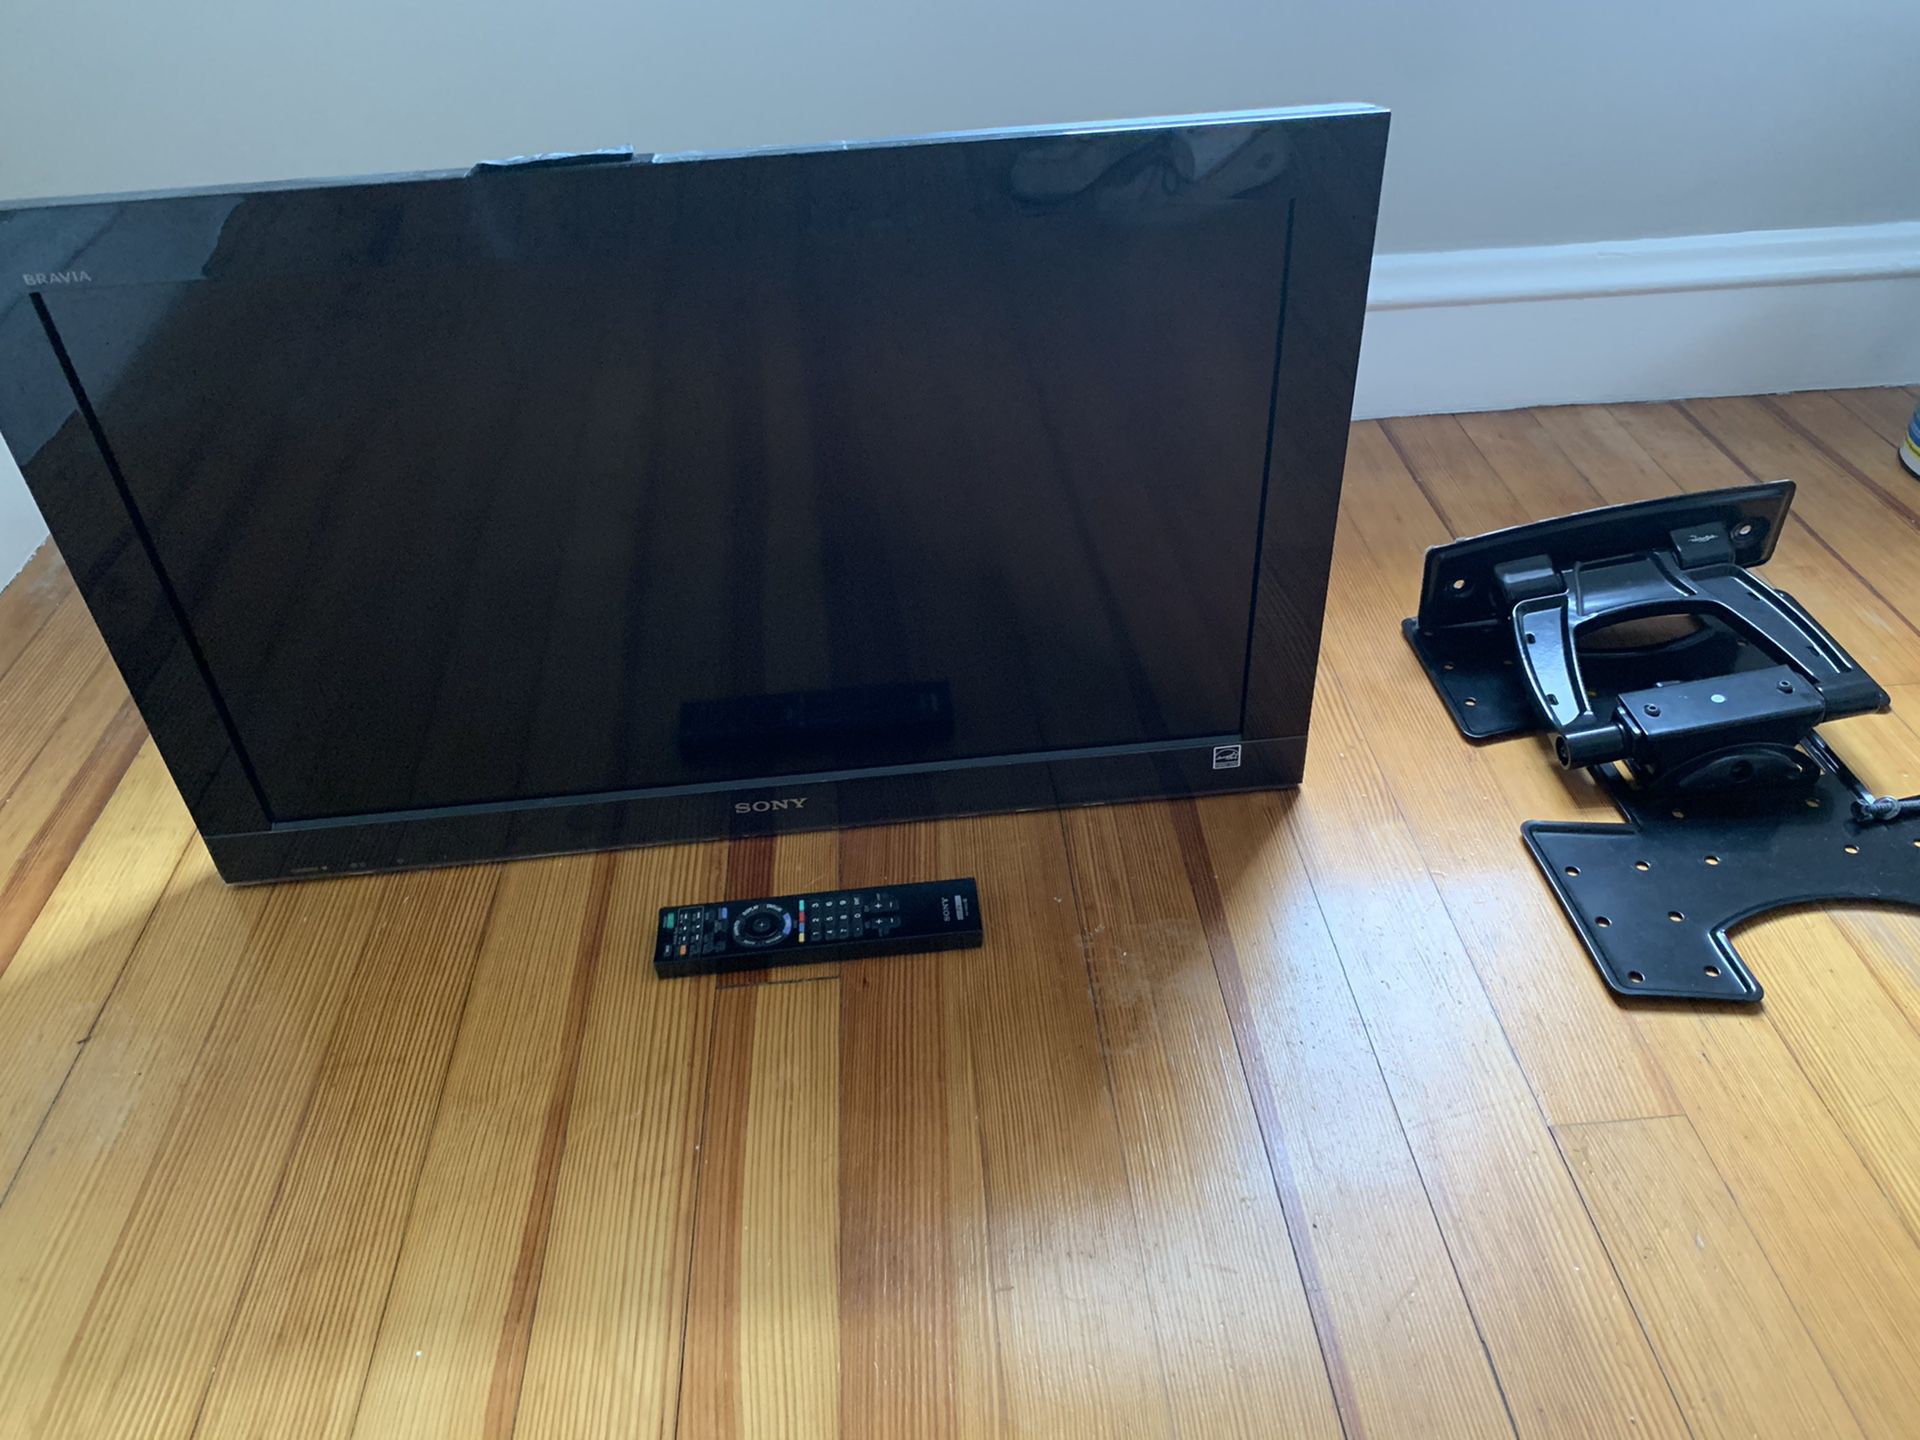 32 inch Sony Bravia TV with full motion wall mount